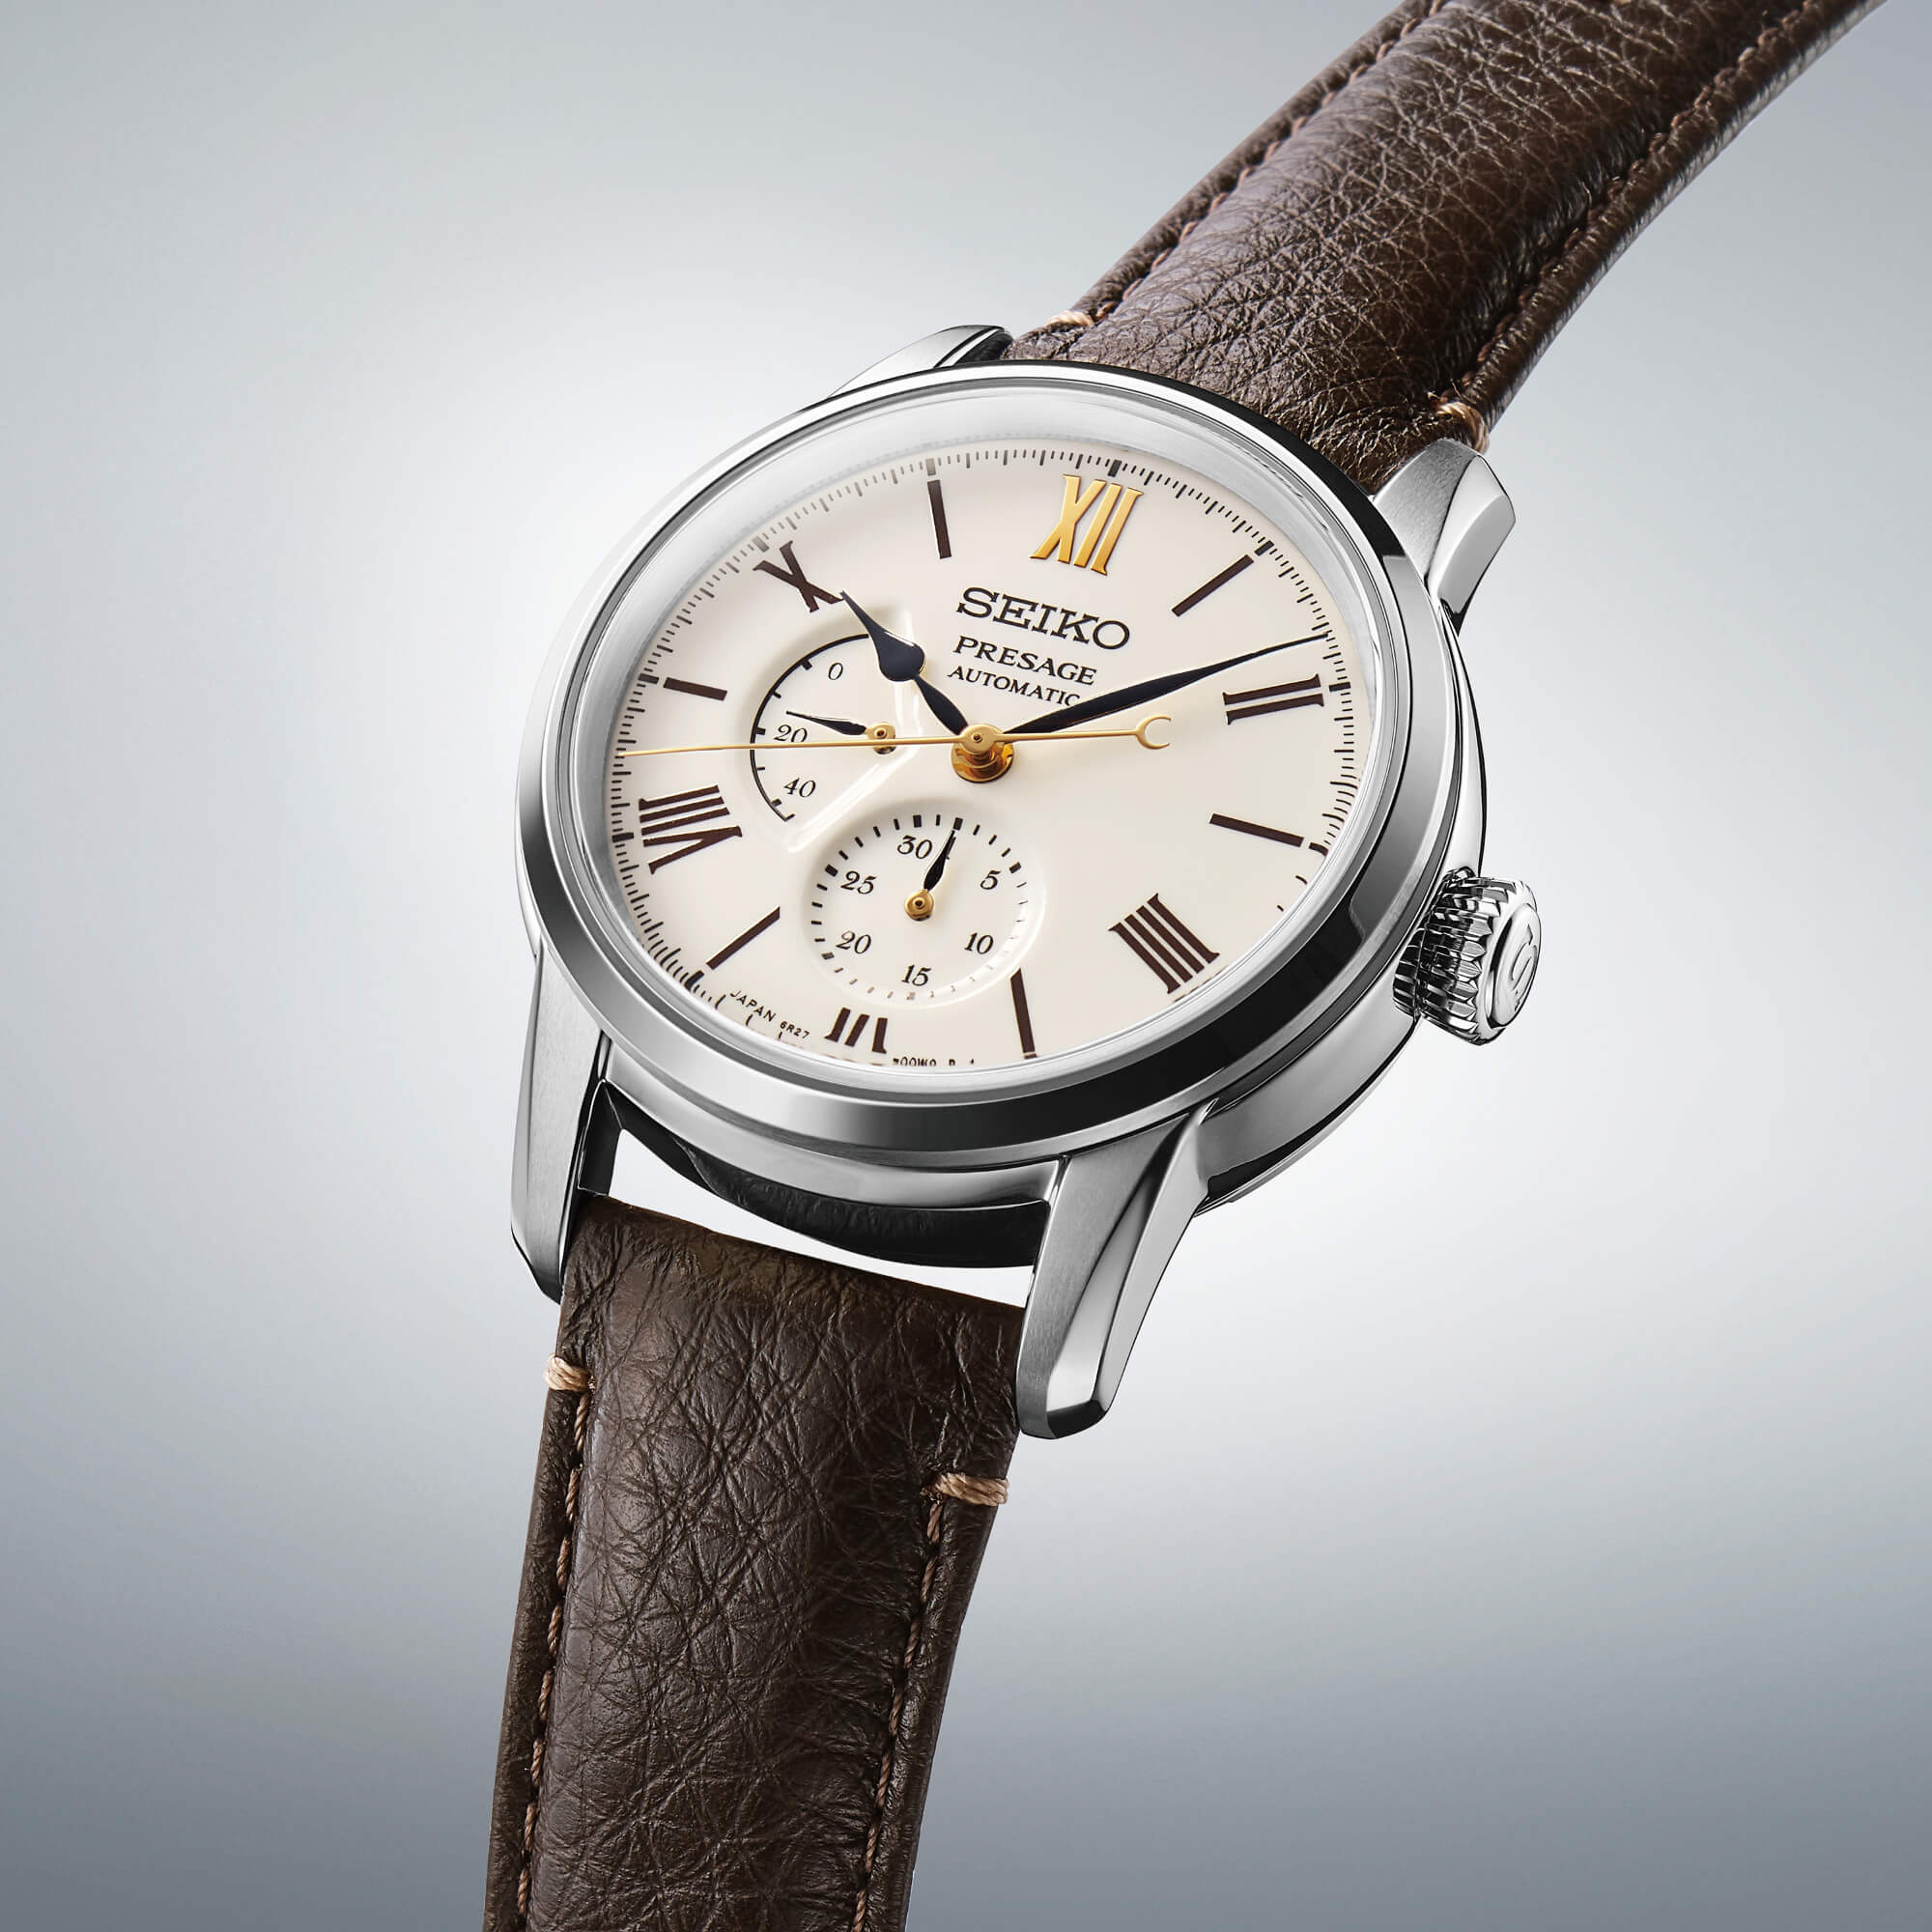 Continues Anniversary Celebration With Four New Presage Watches | aBlogtoWatch